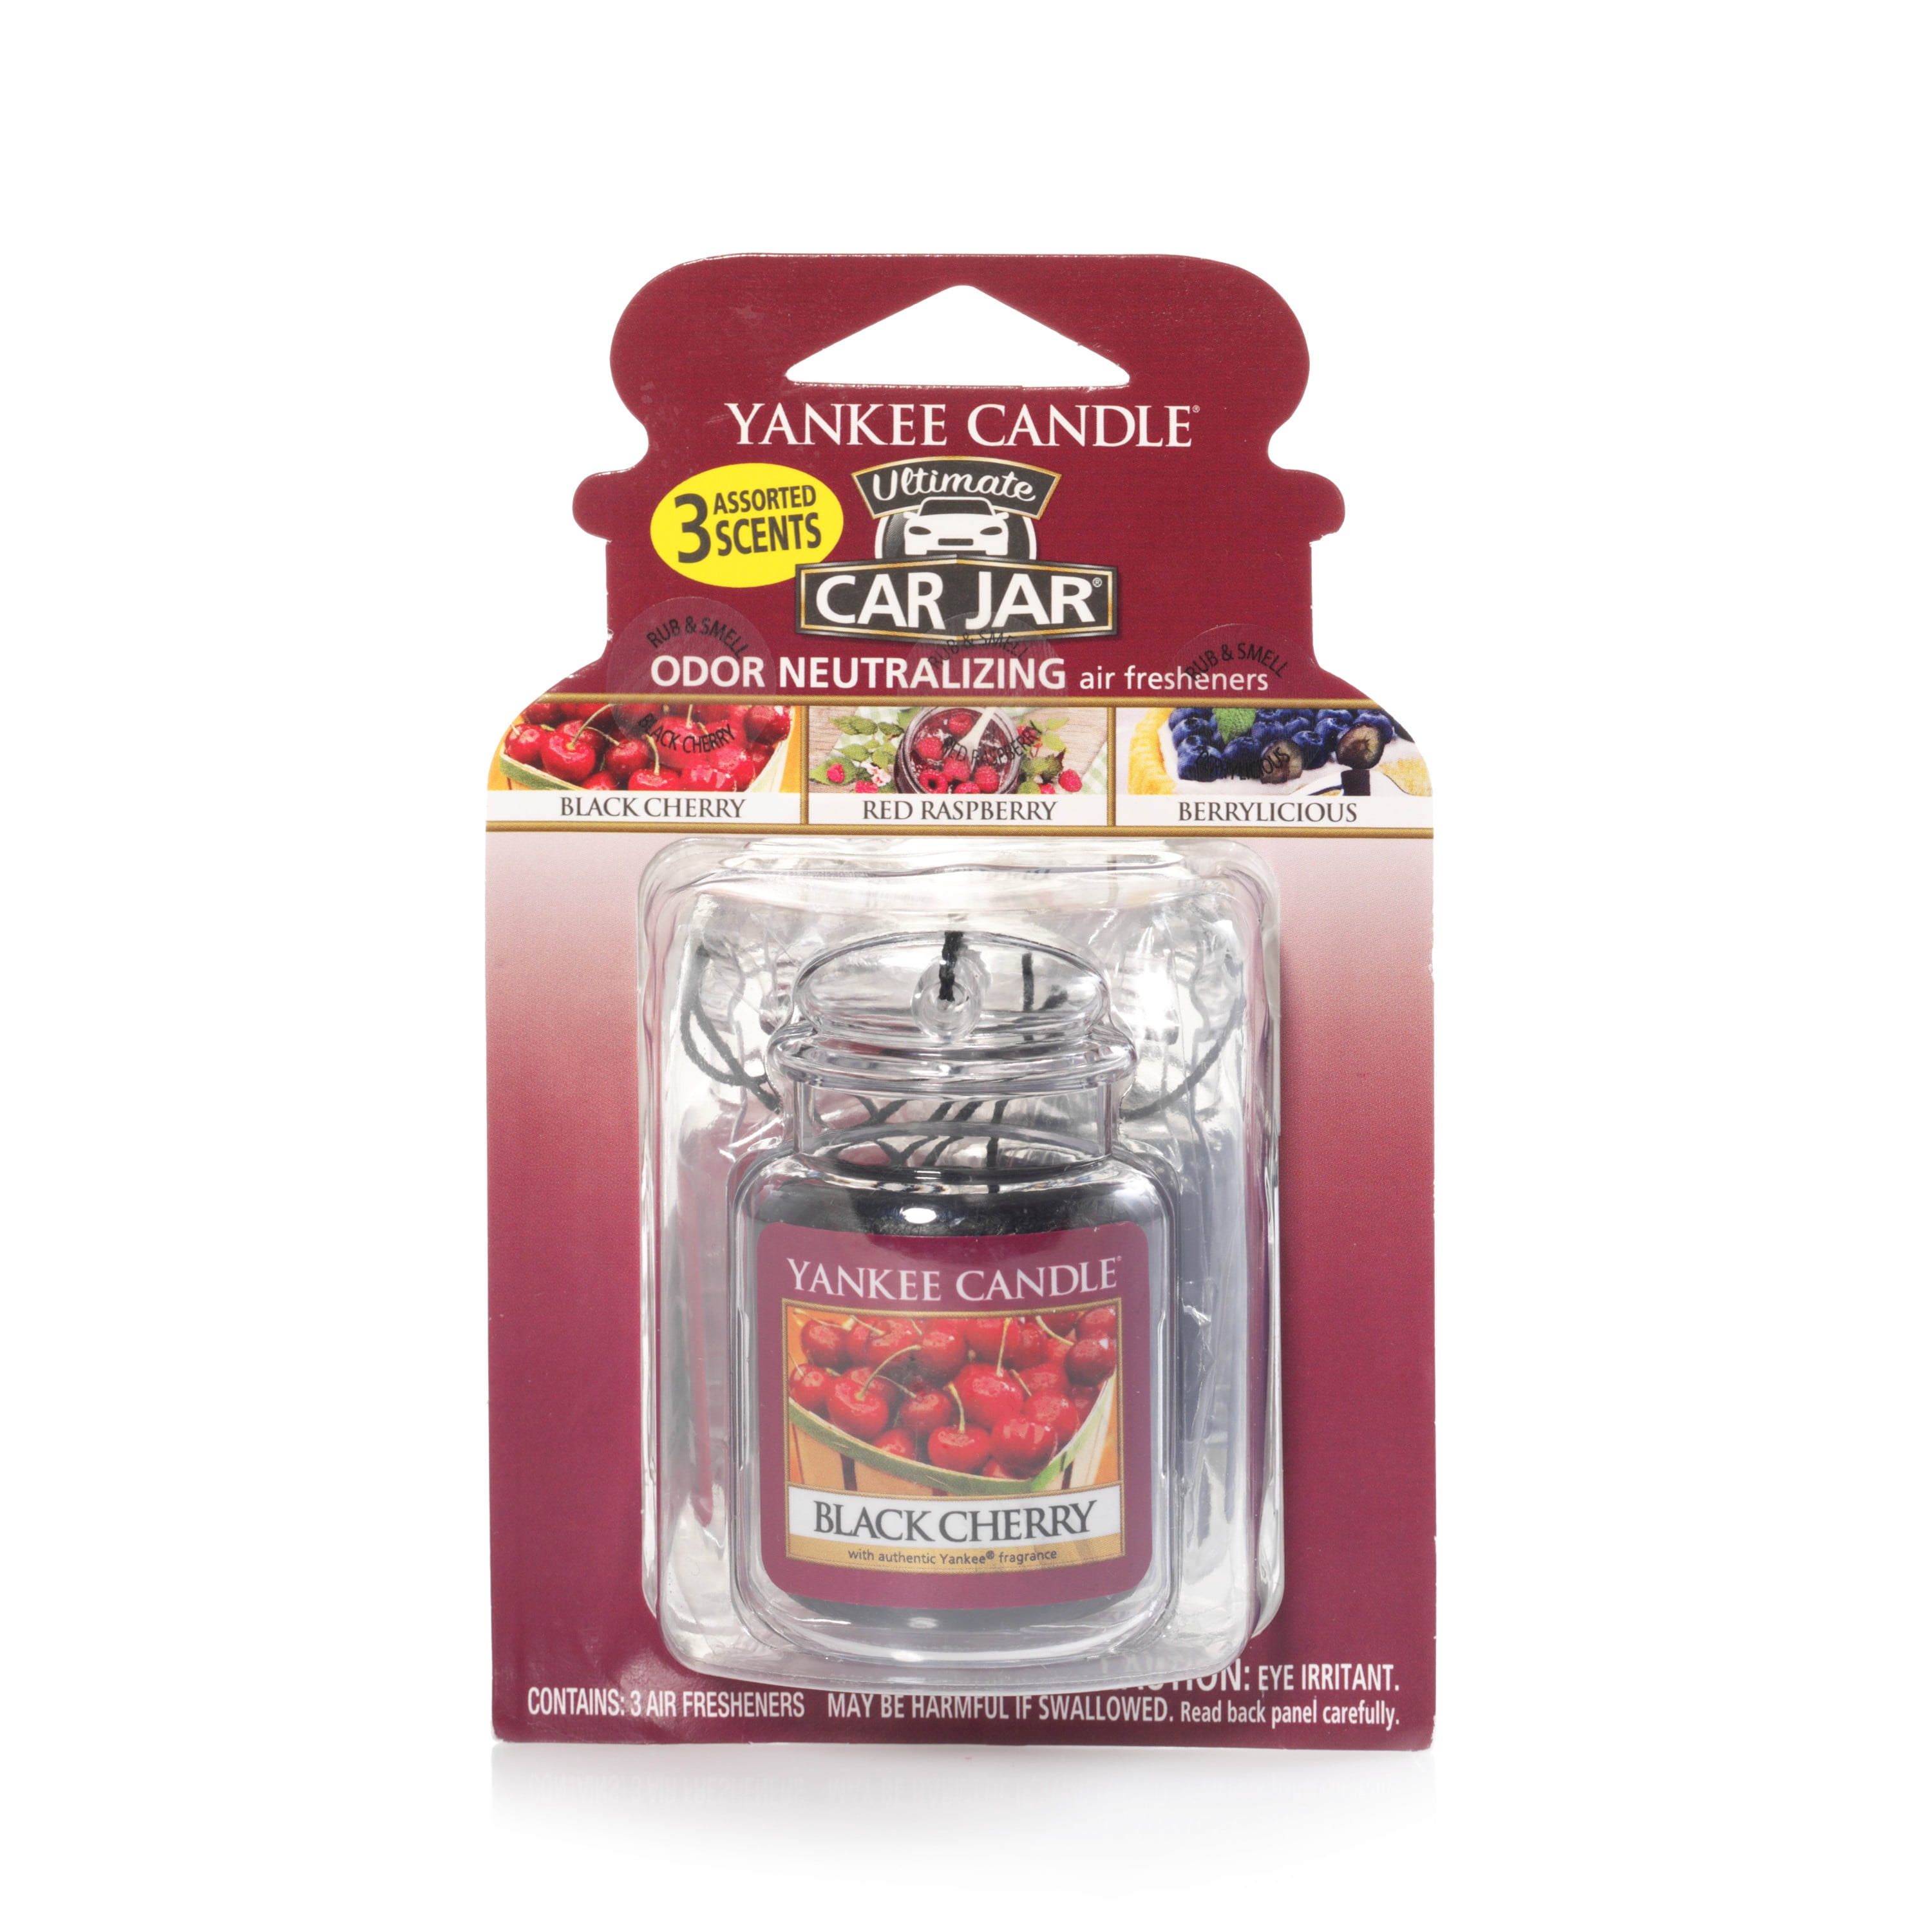 YANKEE CANDLE Car Jar Ultimate RED RASPBERRY Autoduft